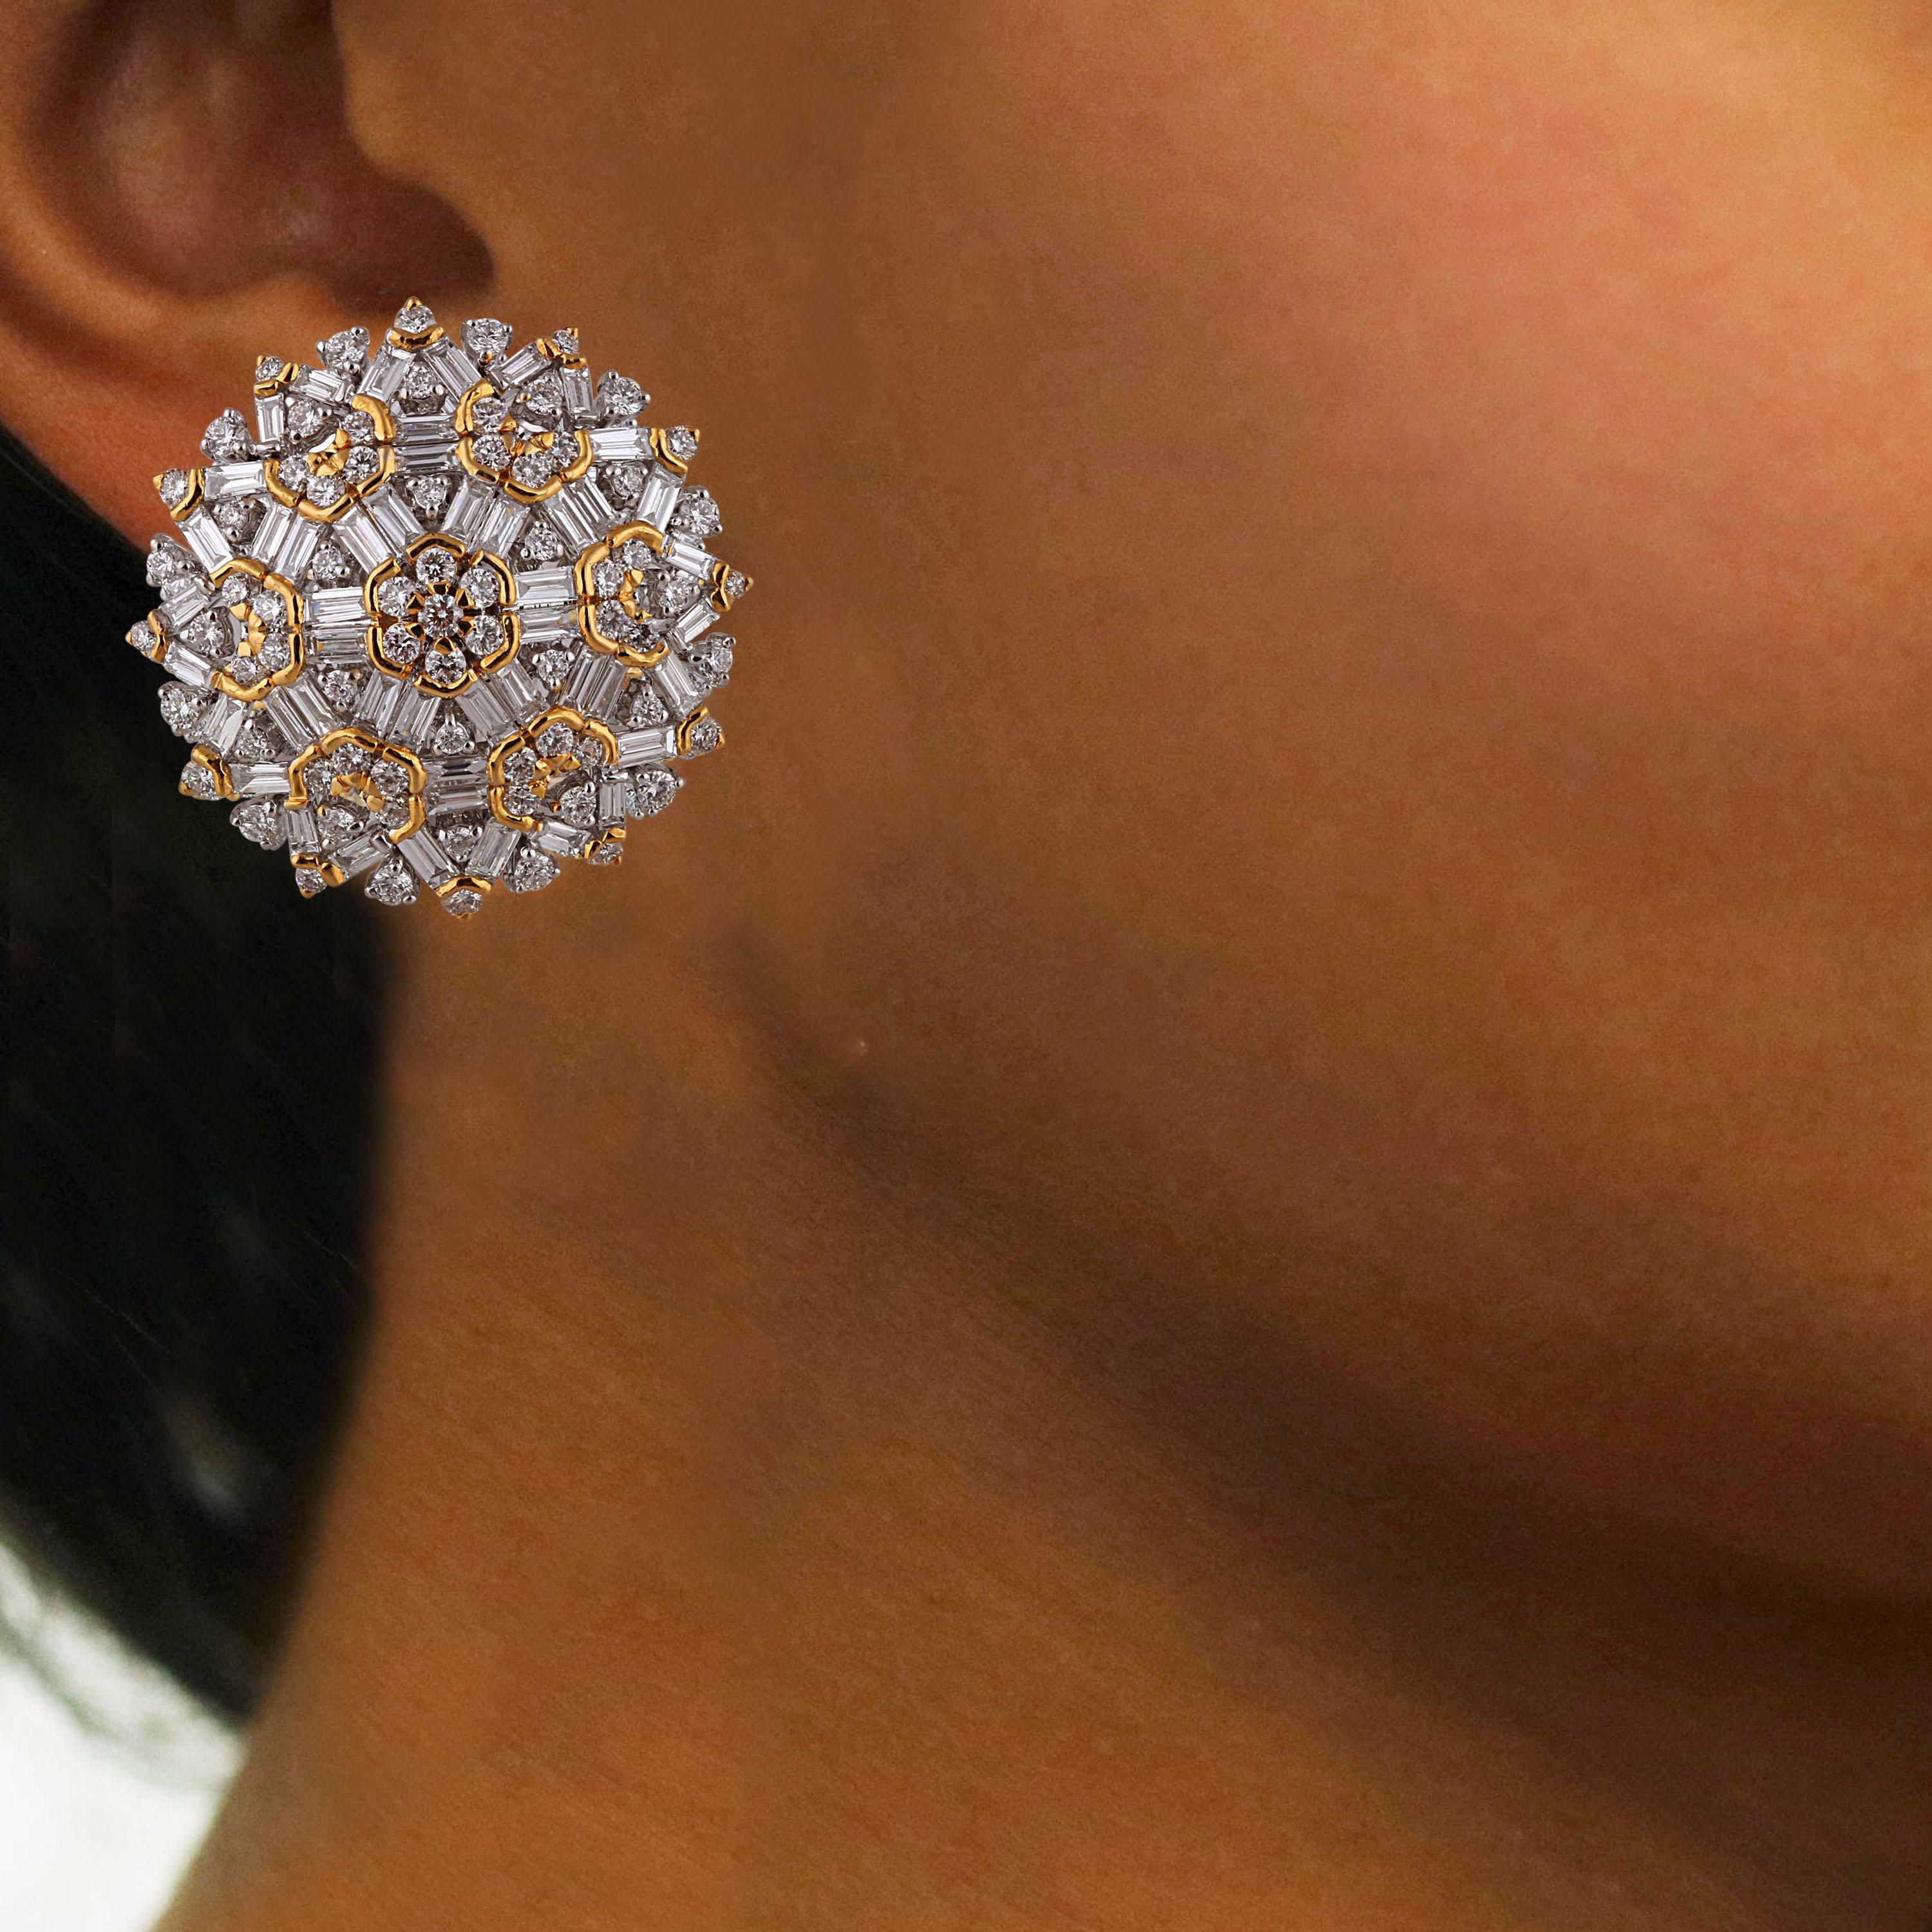 Floral Stud Earrings in Diamonds and 18 Karat Gold 1